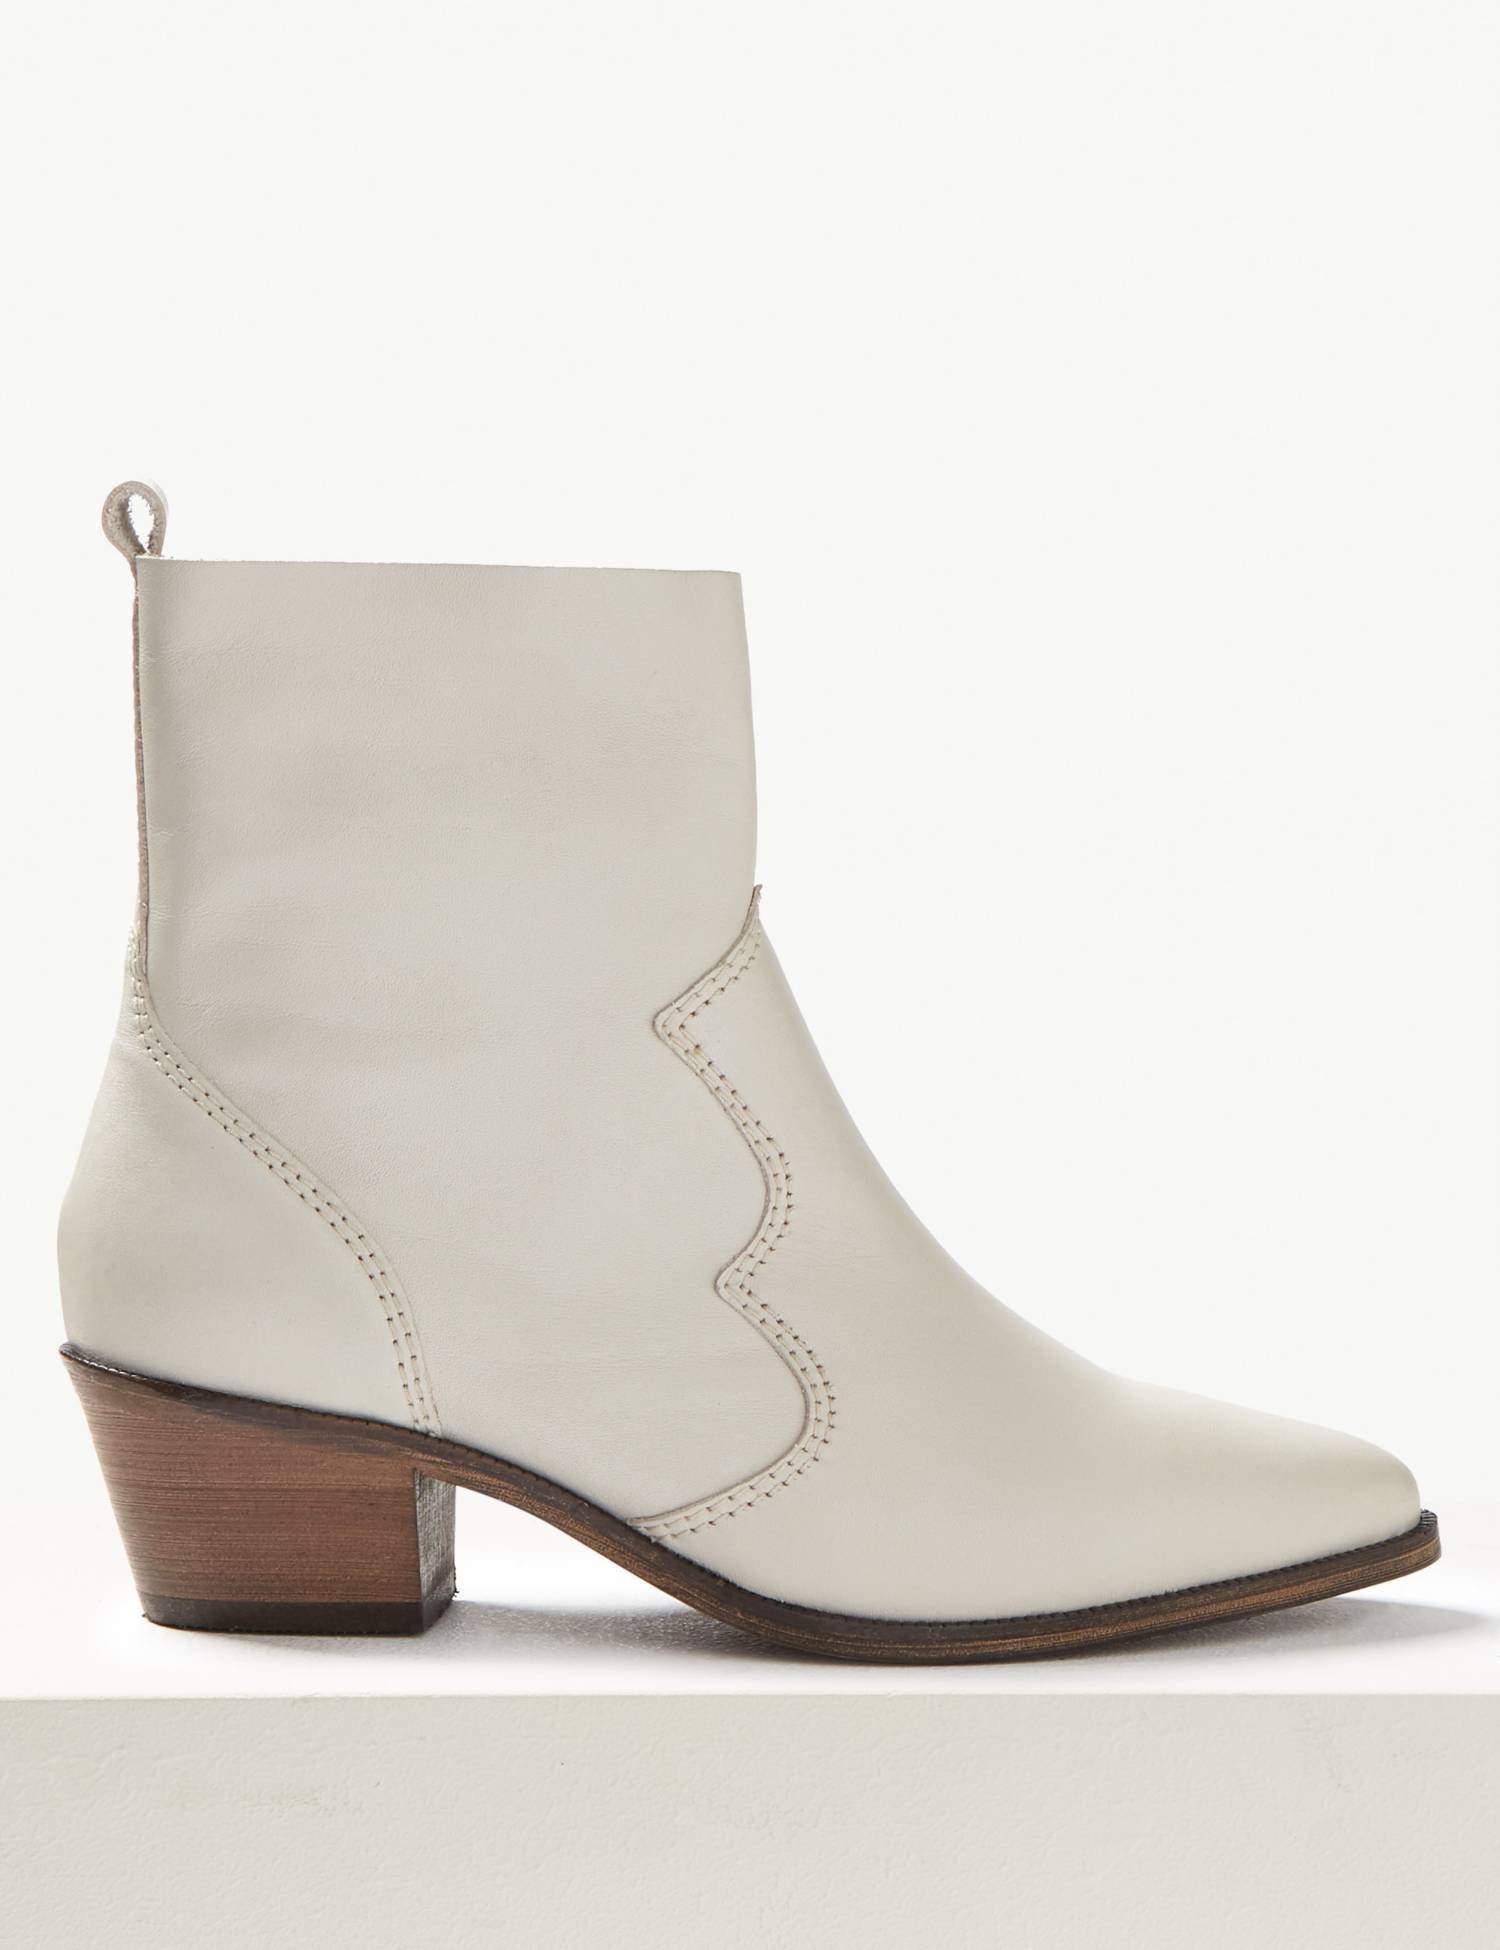 m&s white ankle boots